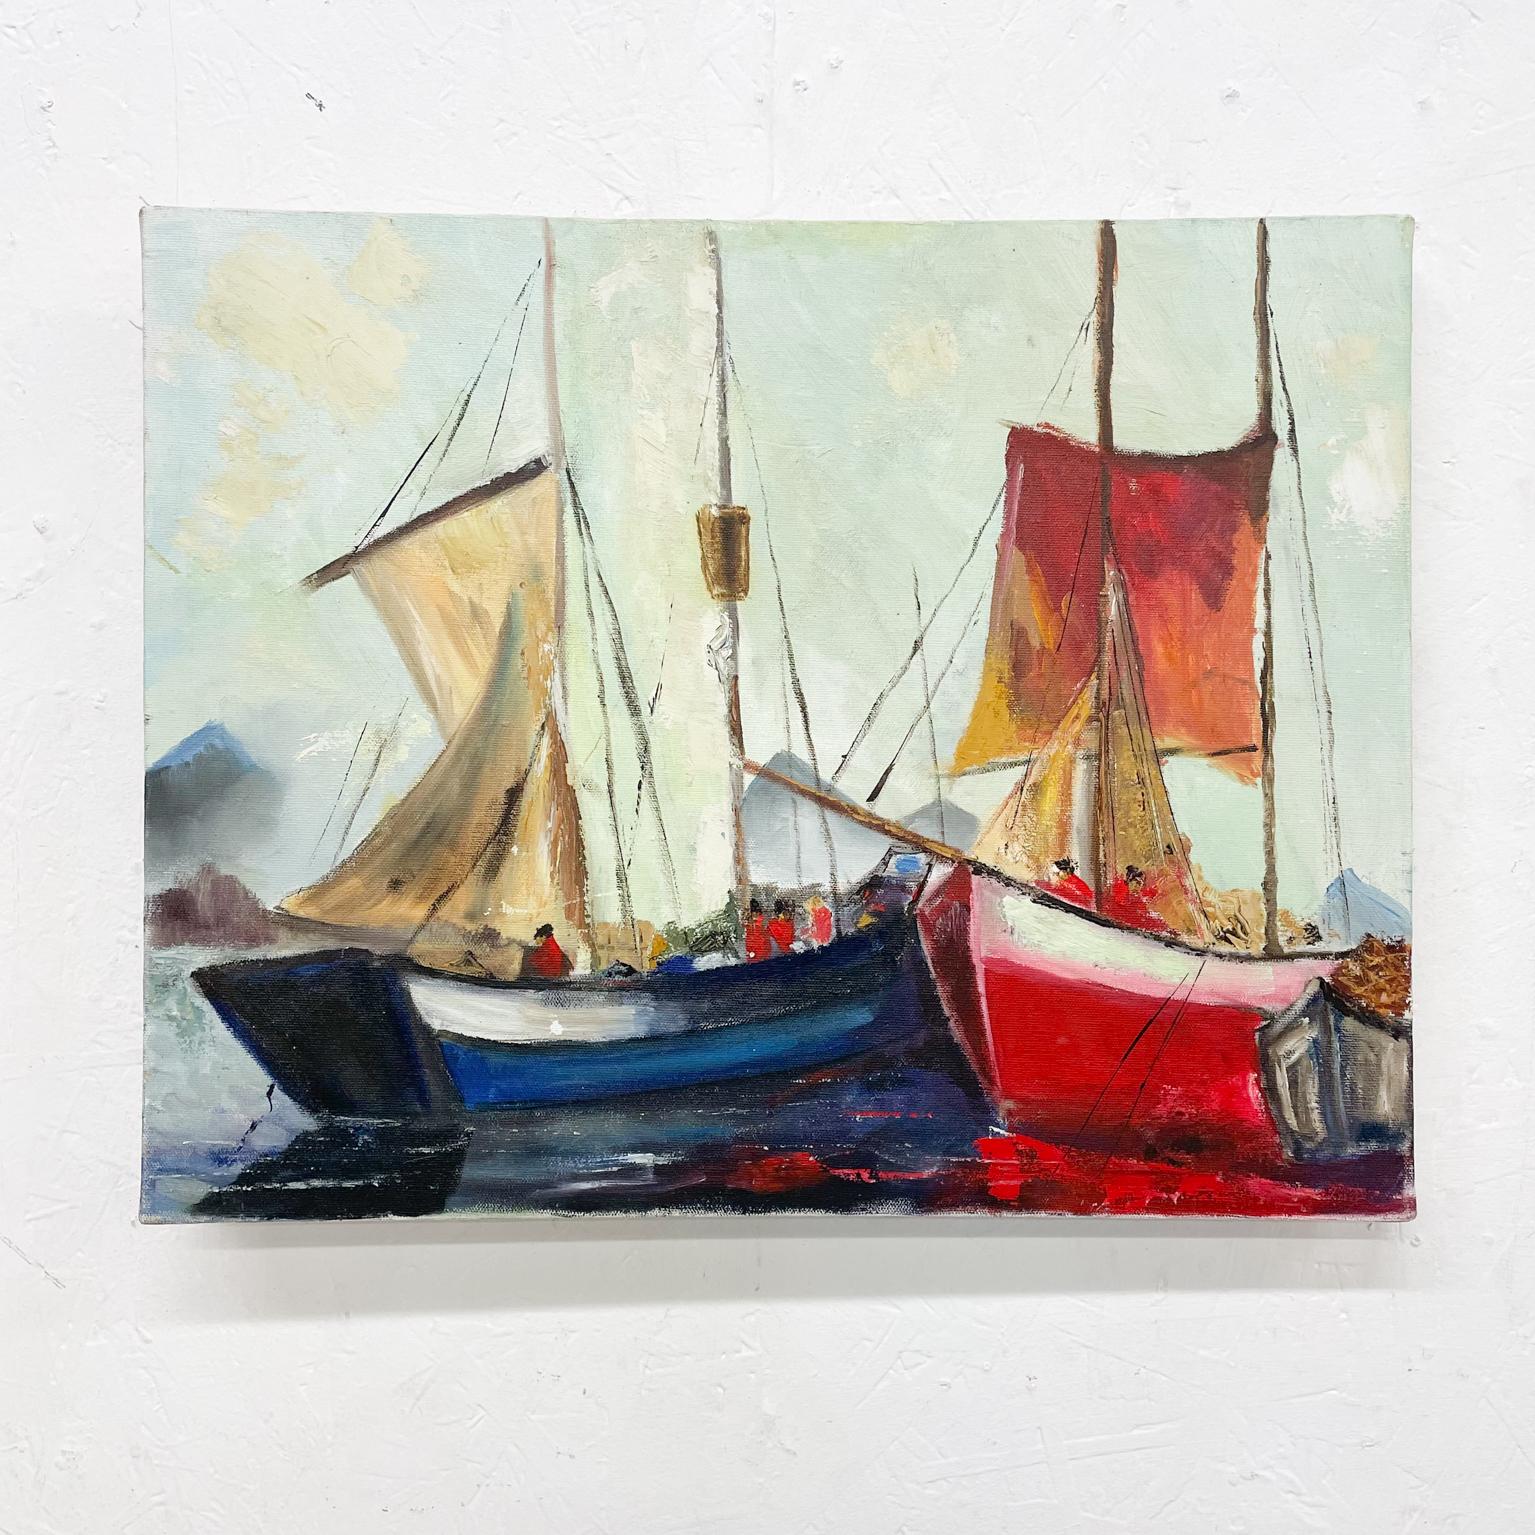 Oil Painting
Modern Sailboat Art oil painting in red white and blue
Unsigned. Canvas oil.
Measures: 20 x 16 x .75 inches
Preowned original unrestored condition.
Please see images provided.
    